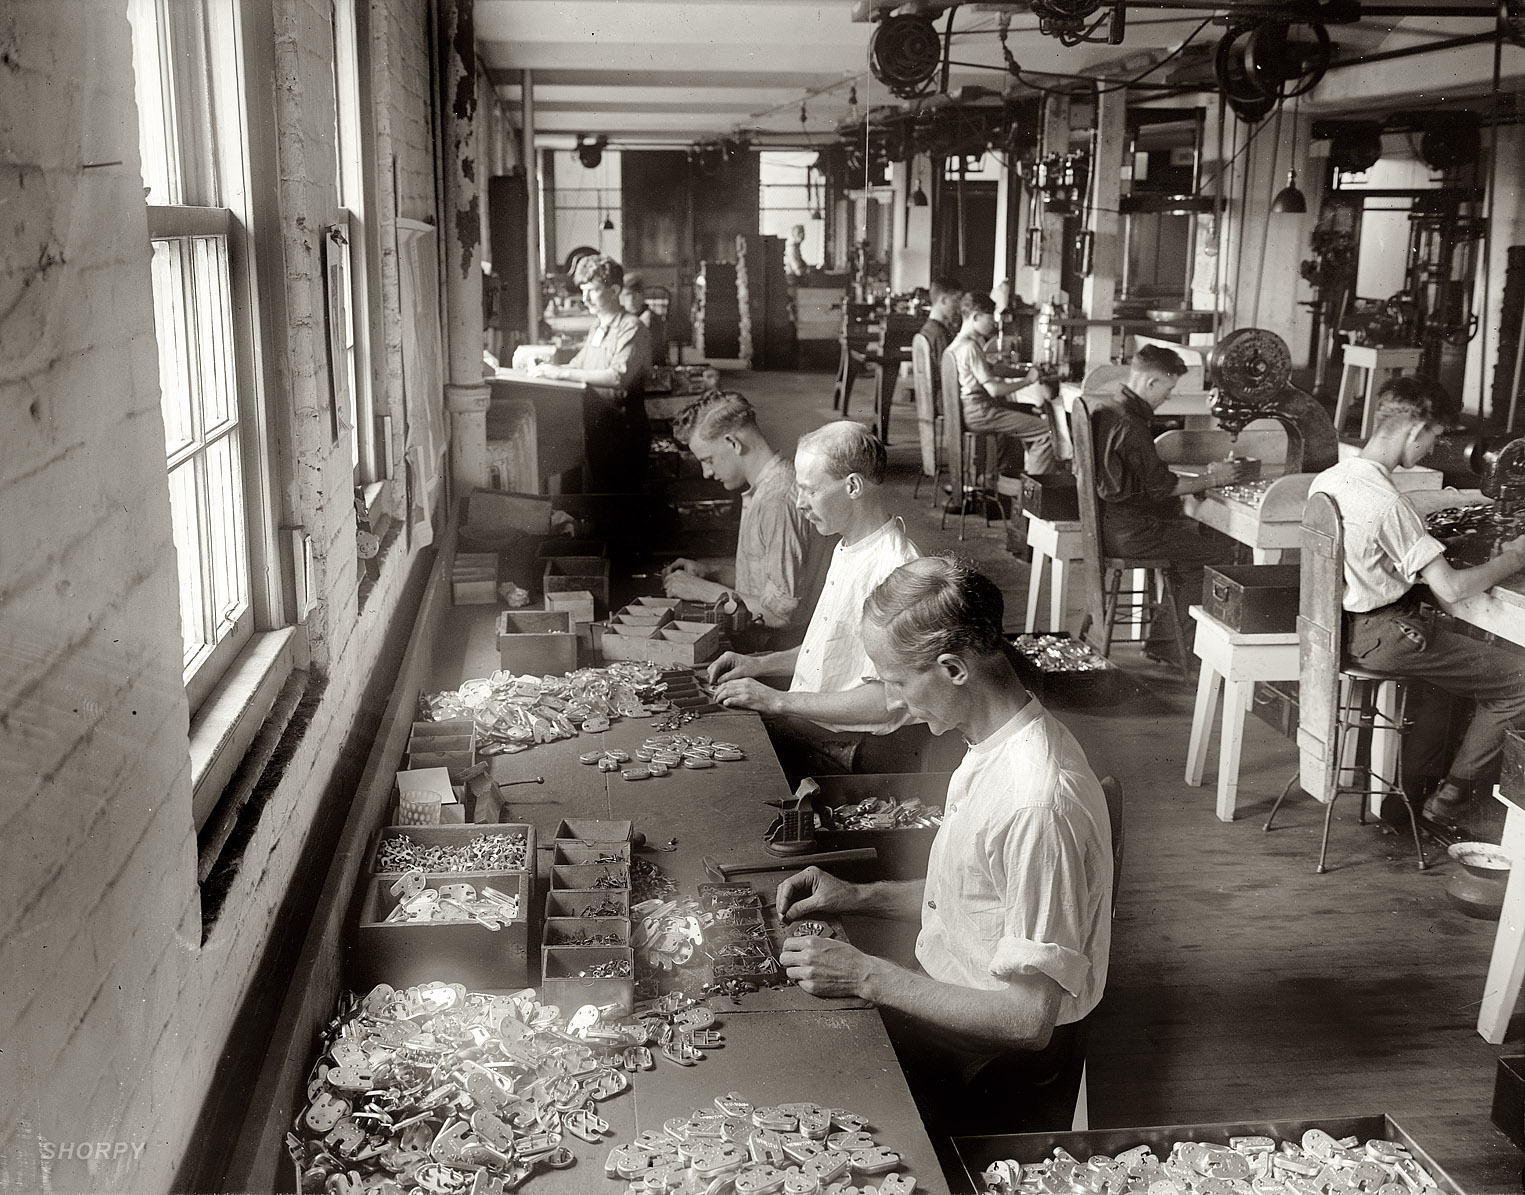 An uncaptioned circa 1915 photo showing the assembly of what look like locks or latches inscribed "U.S. MAIL." Like any progressive workplace, it's equipped with spittoons. Harris & Ewing Collection glass negative. View full size. Update: These are "L.A. locks" being assembled at the Post Office Department's Mail Equipment Shops, 2135 Fifth Street N.E. See the comments for details.